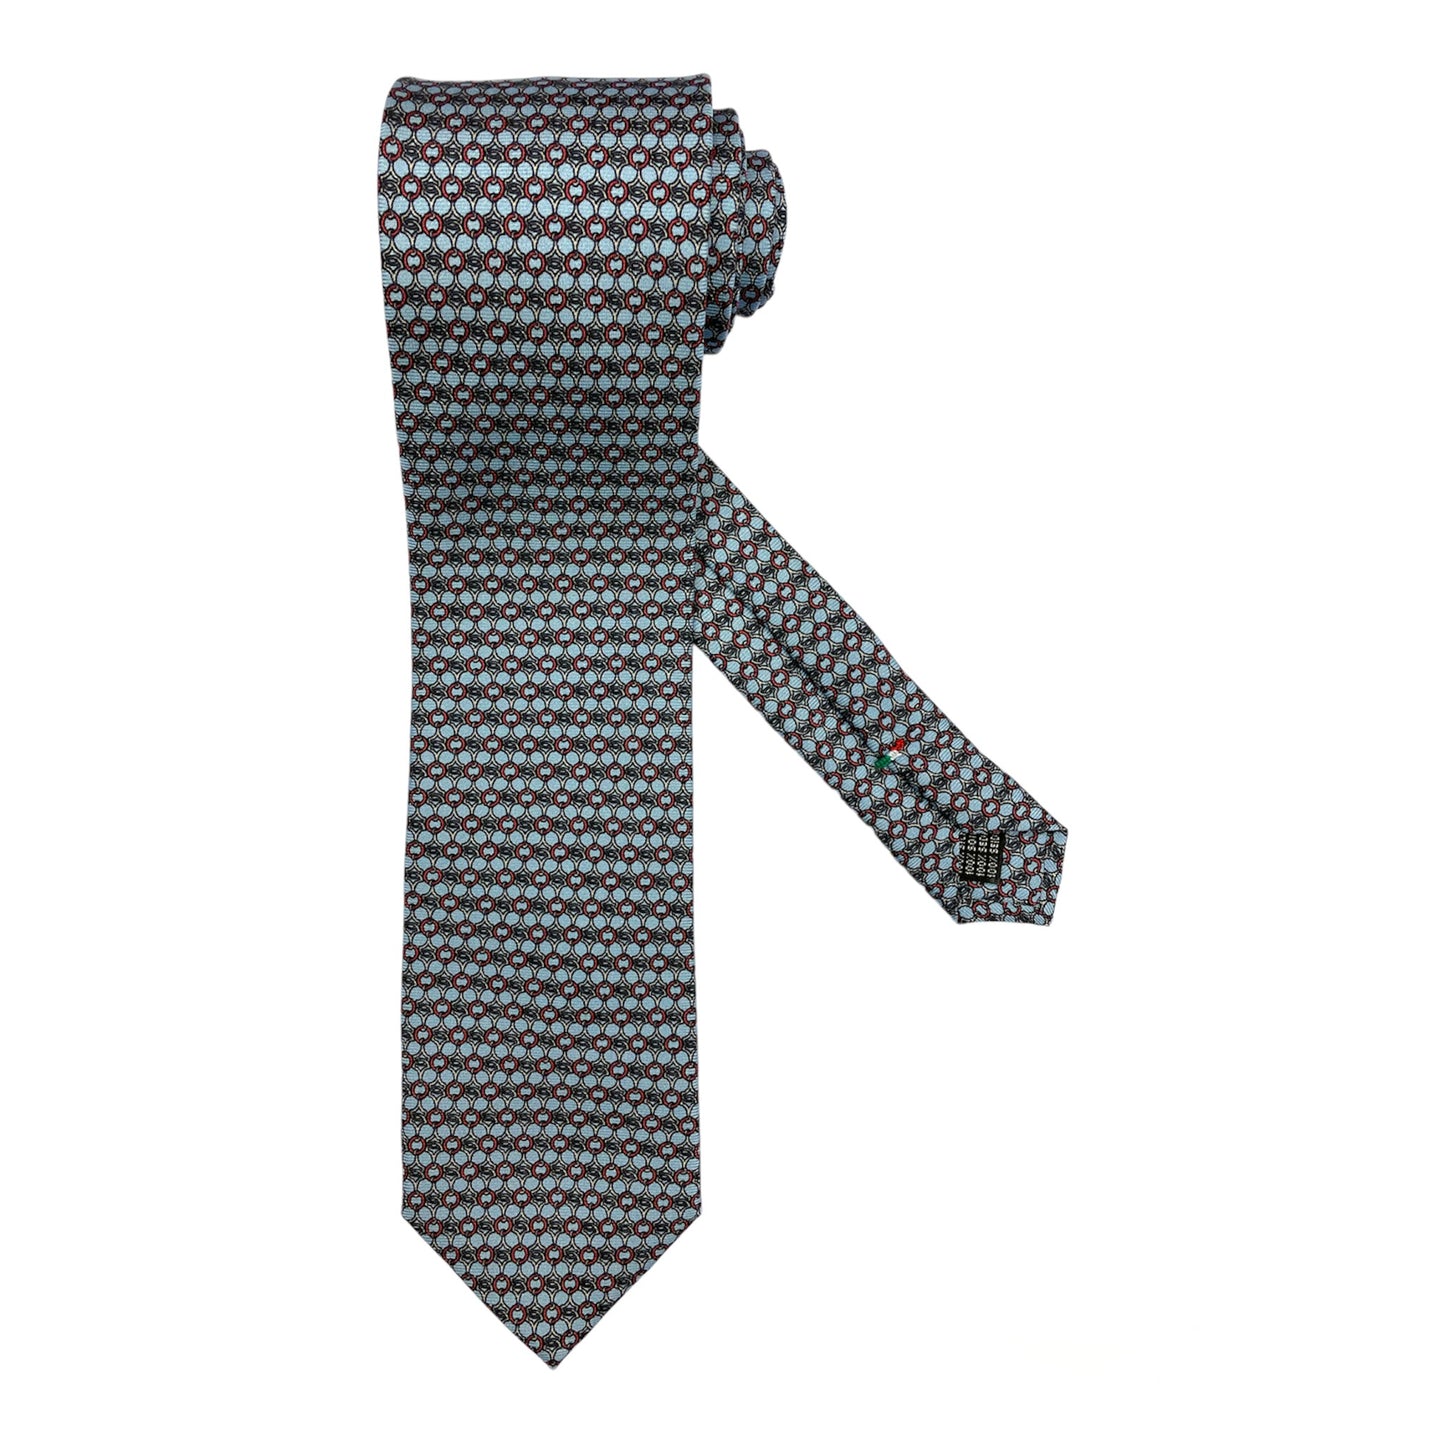 Light blue silk tie with red circle chains